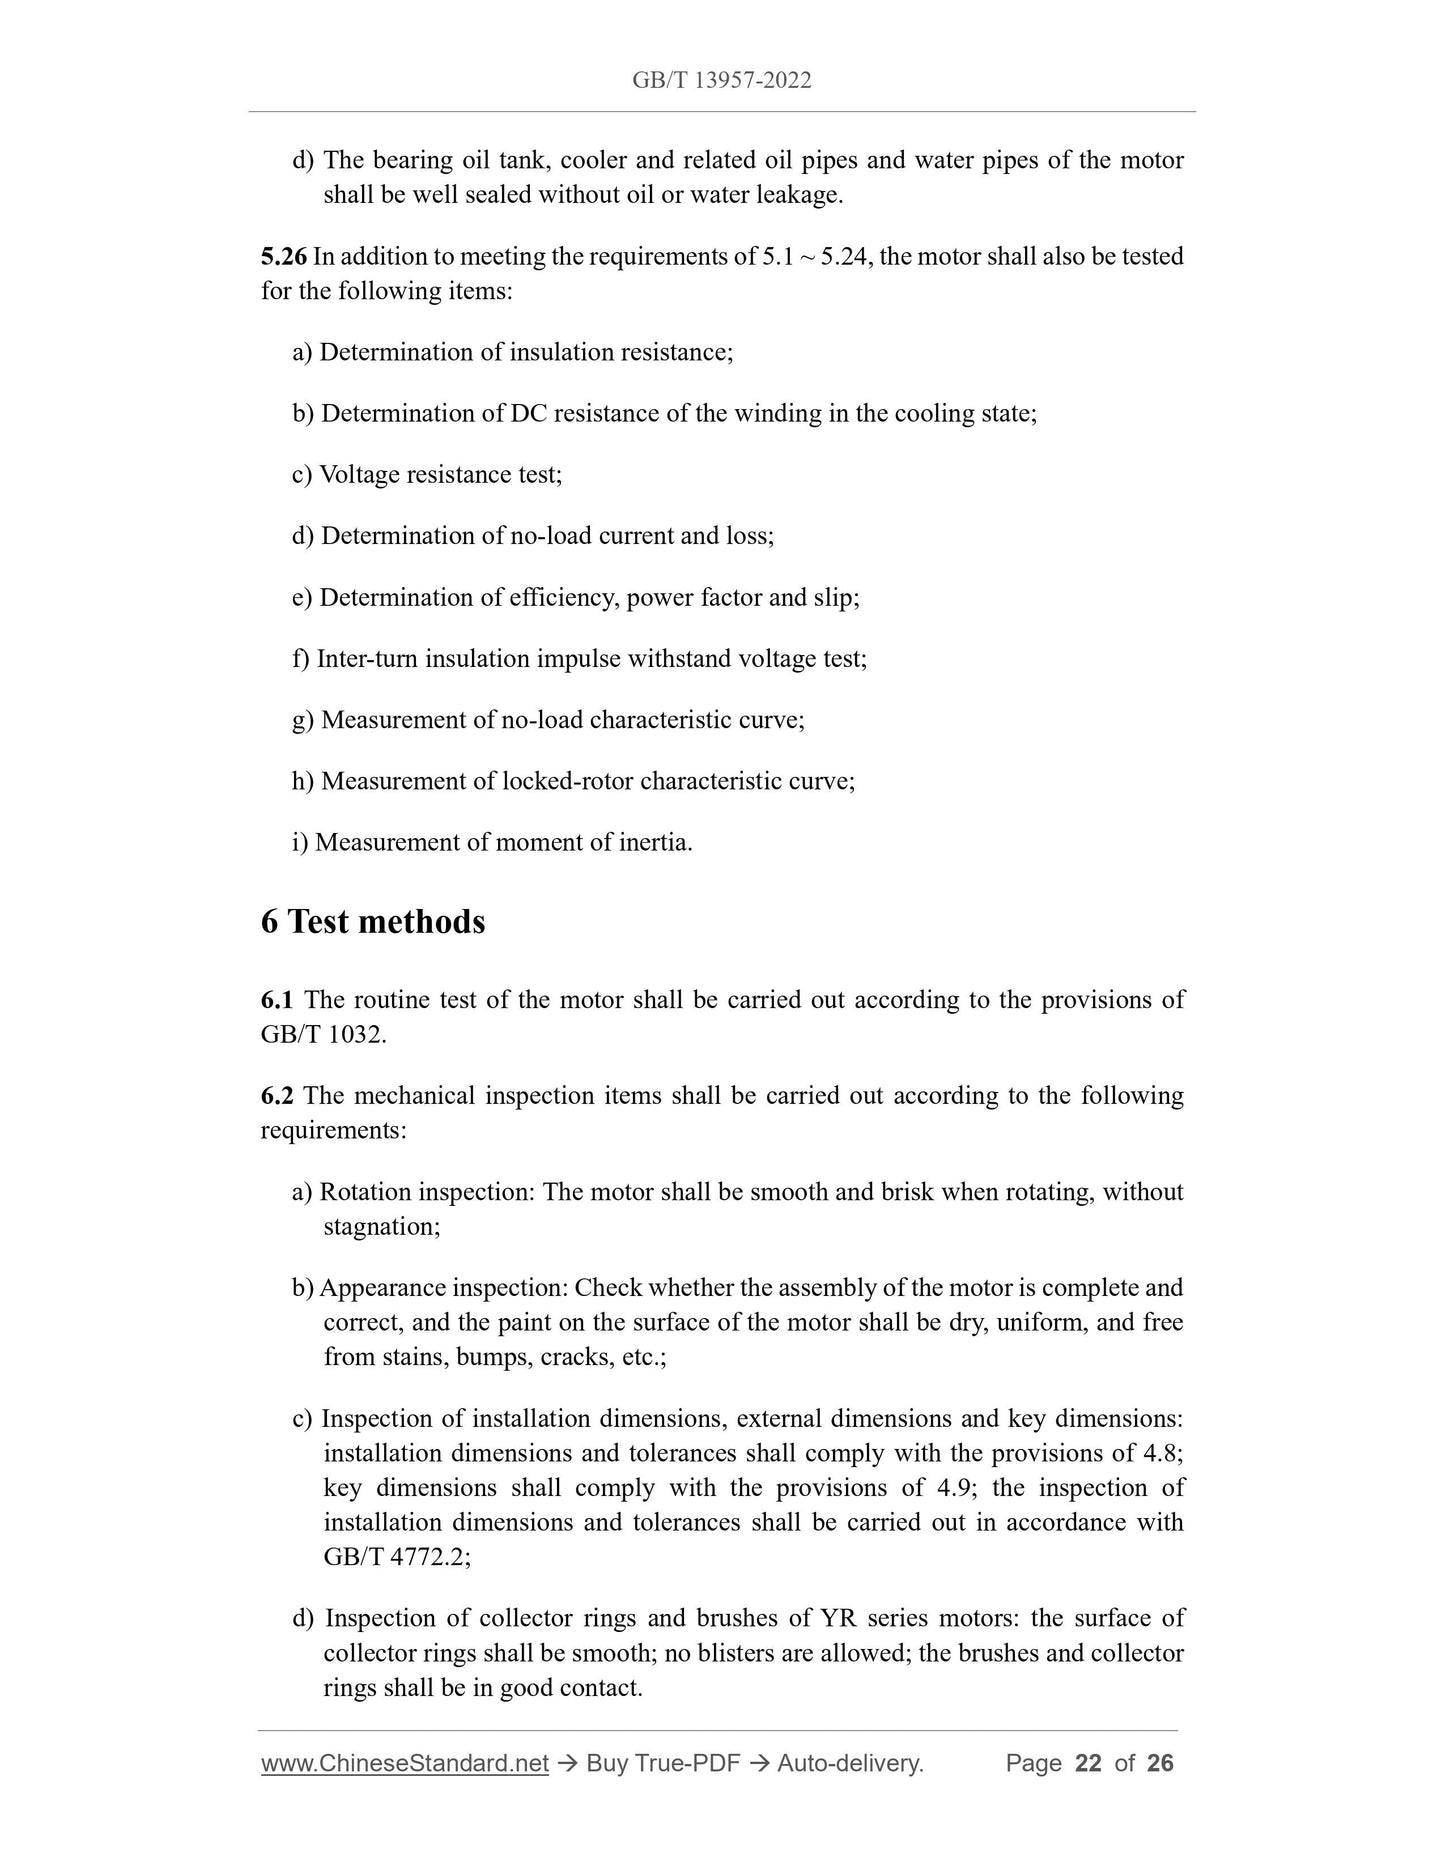 GB/T 13957-2022 Page 7